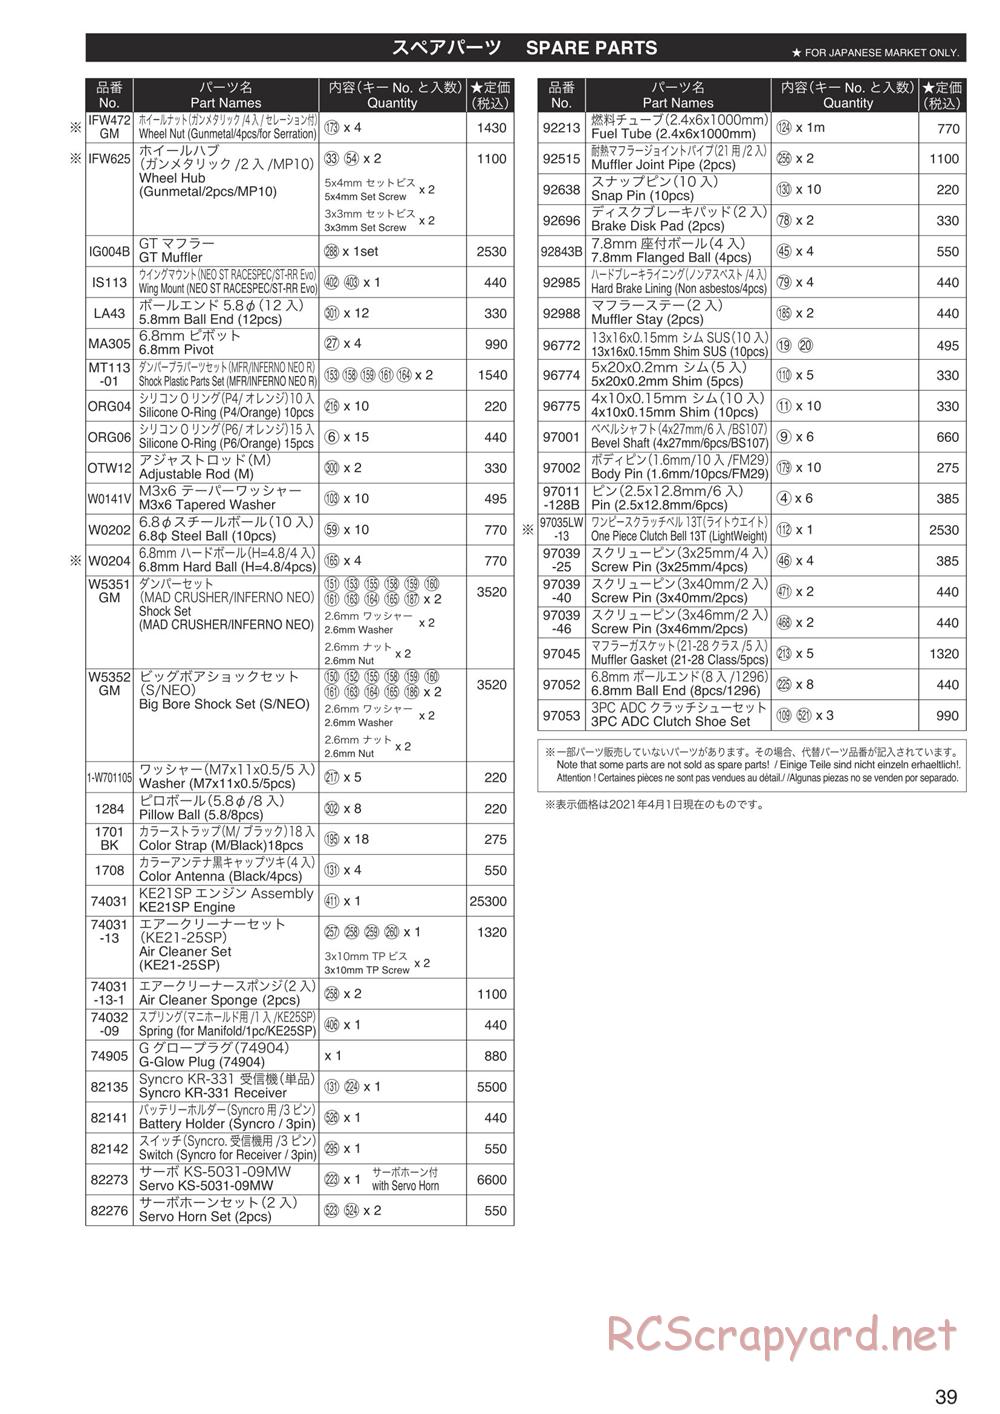 Kyosho - Inferno Neo 3.0 - Parts List - Page 2